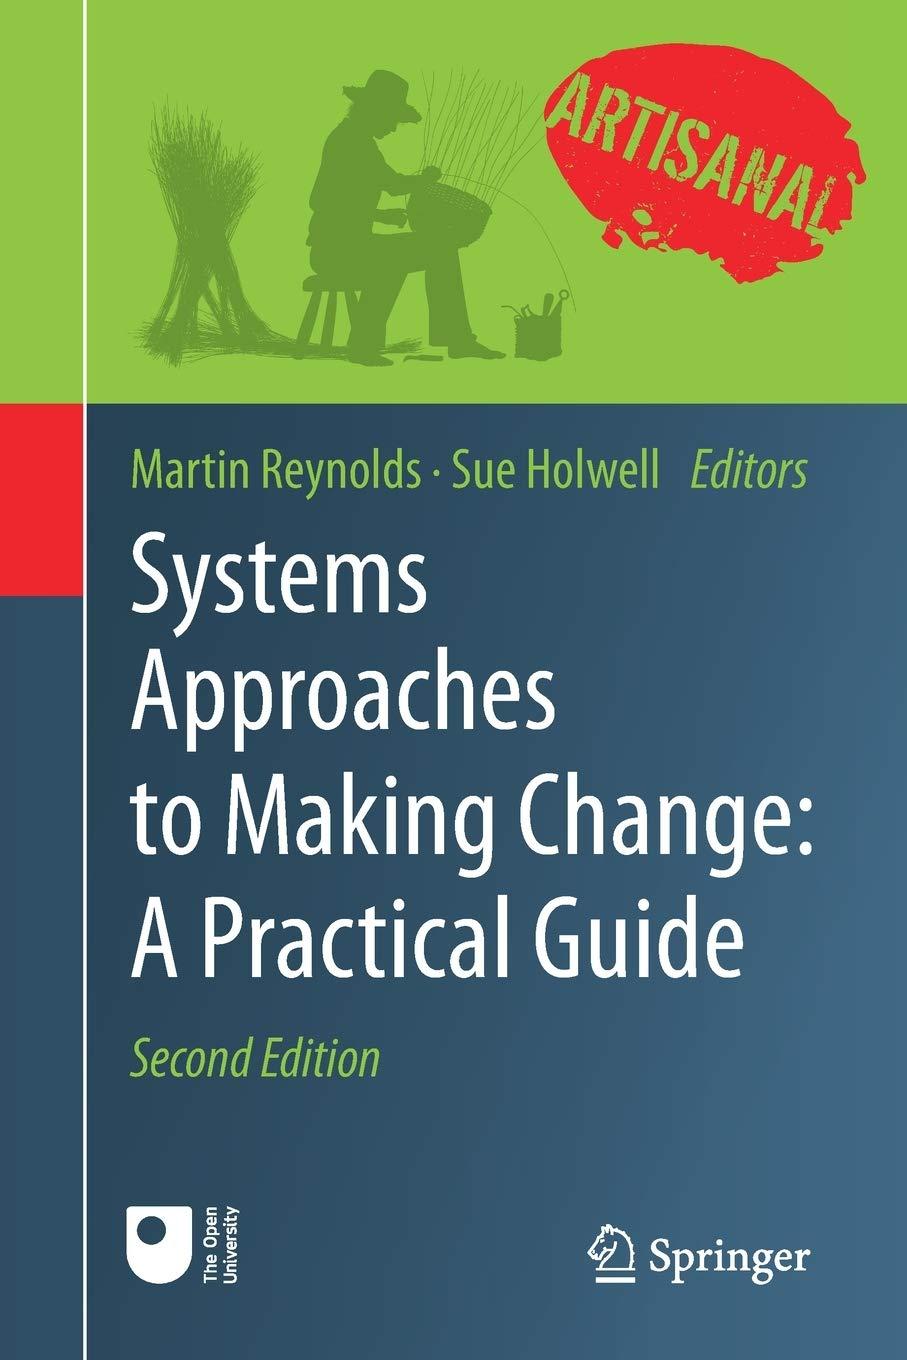 systems approaches to making change a practical guide 2nd edition martin reynolds, sue holwell 1447174712,